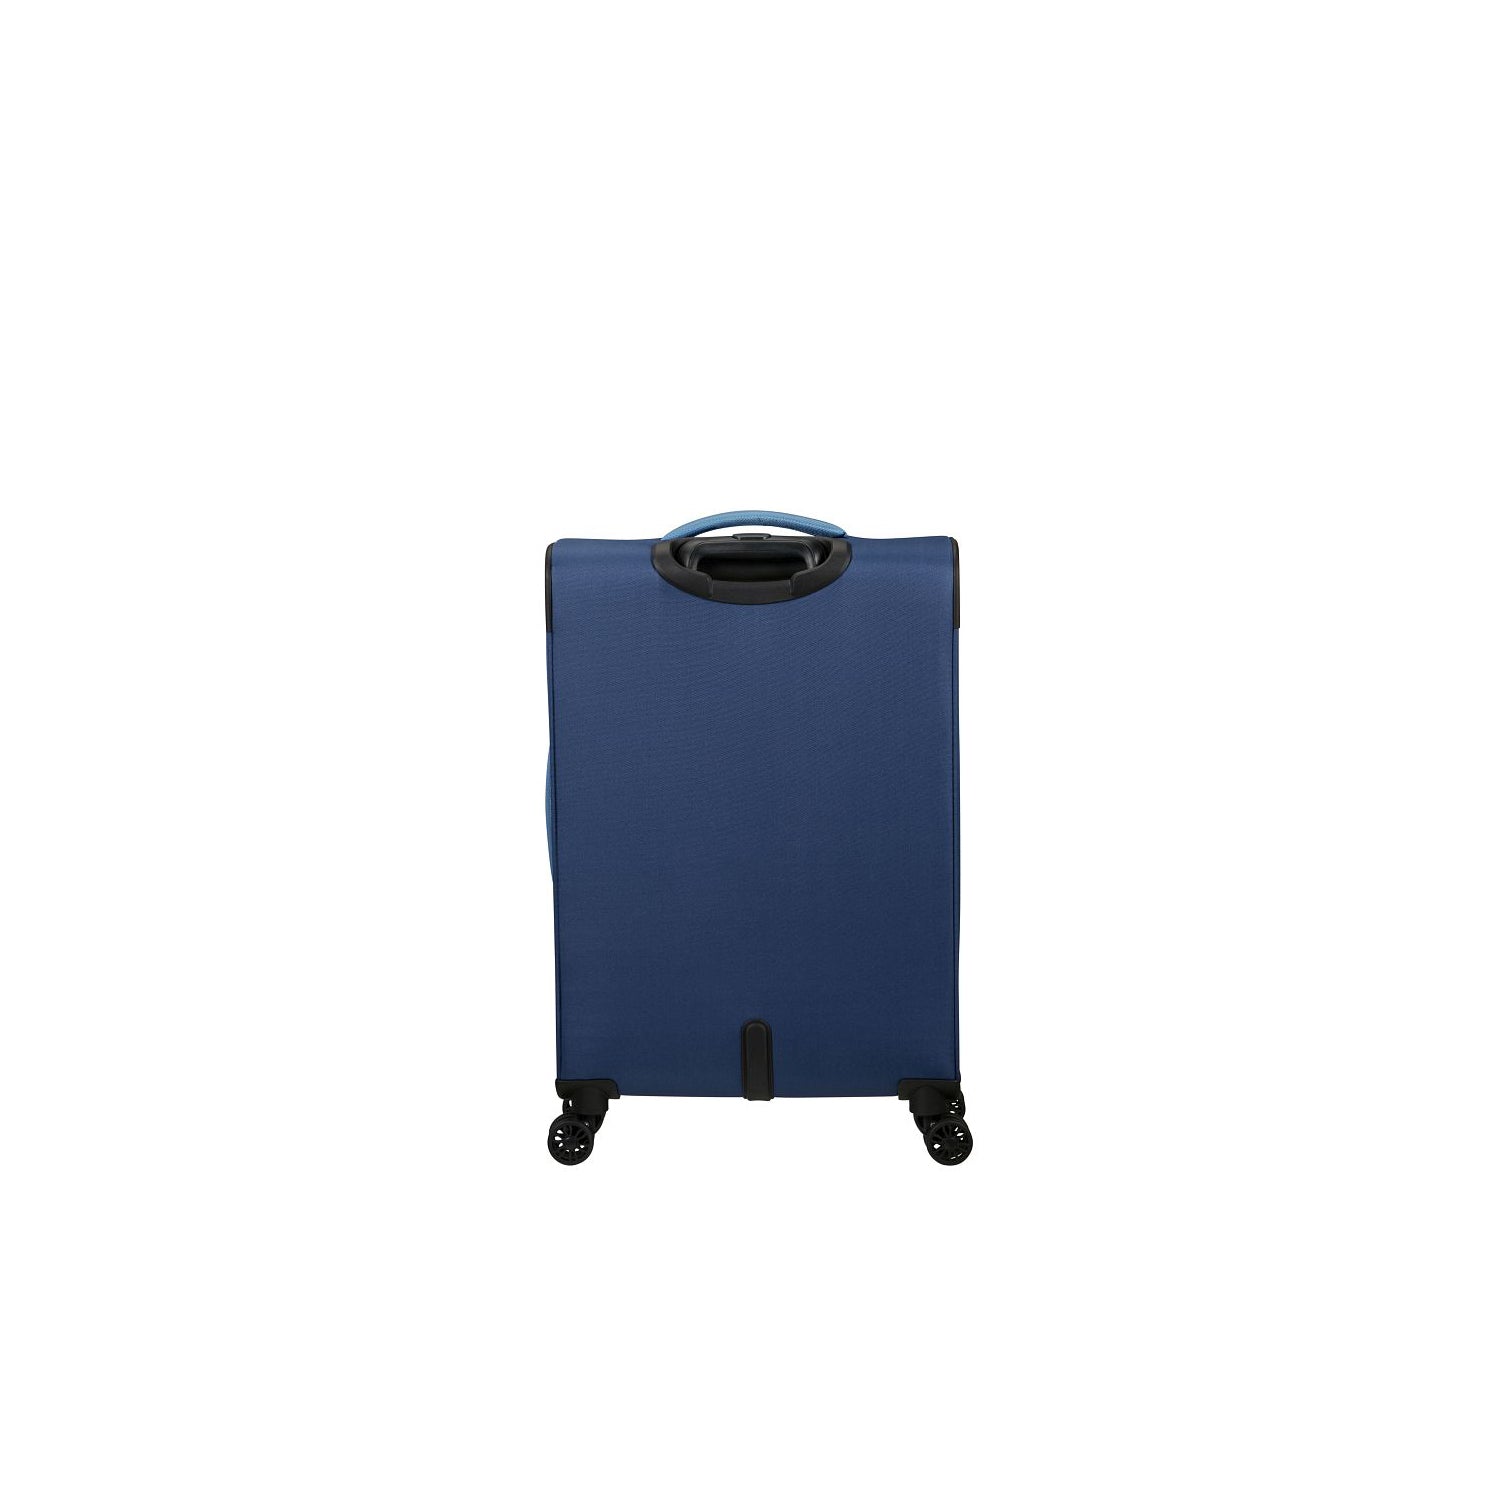 American Tourister Pulsonic Spinner Combat Navy 4 Doppelrollen Trolley M 68 cm